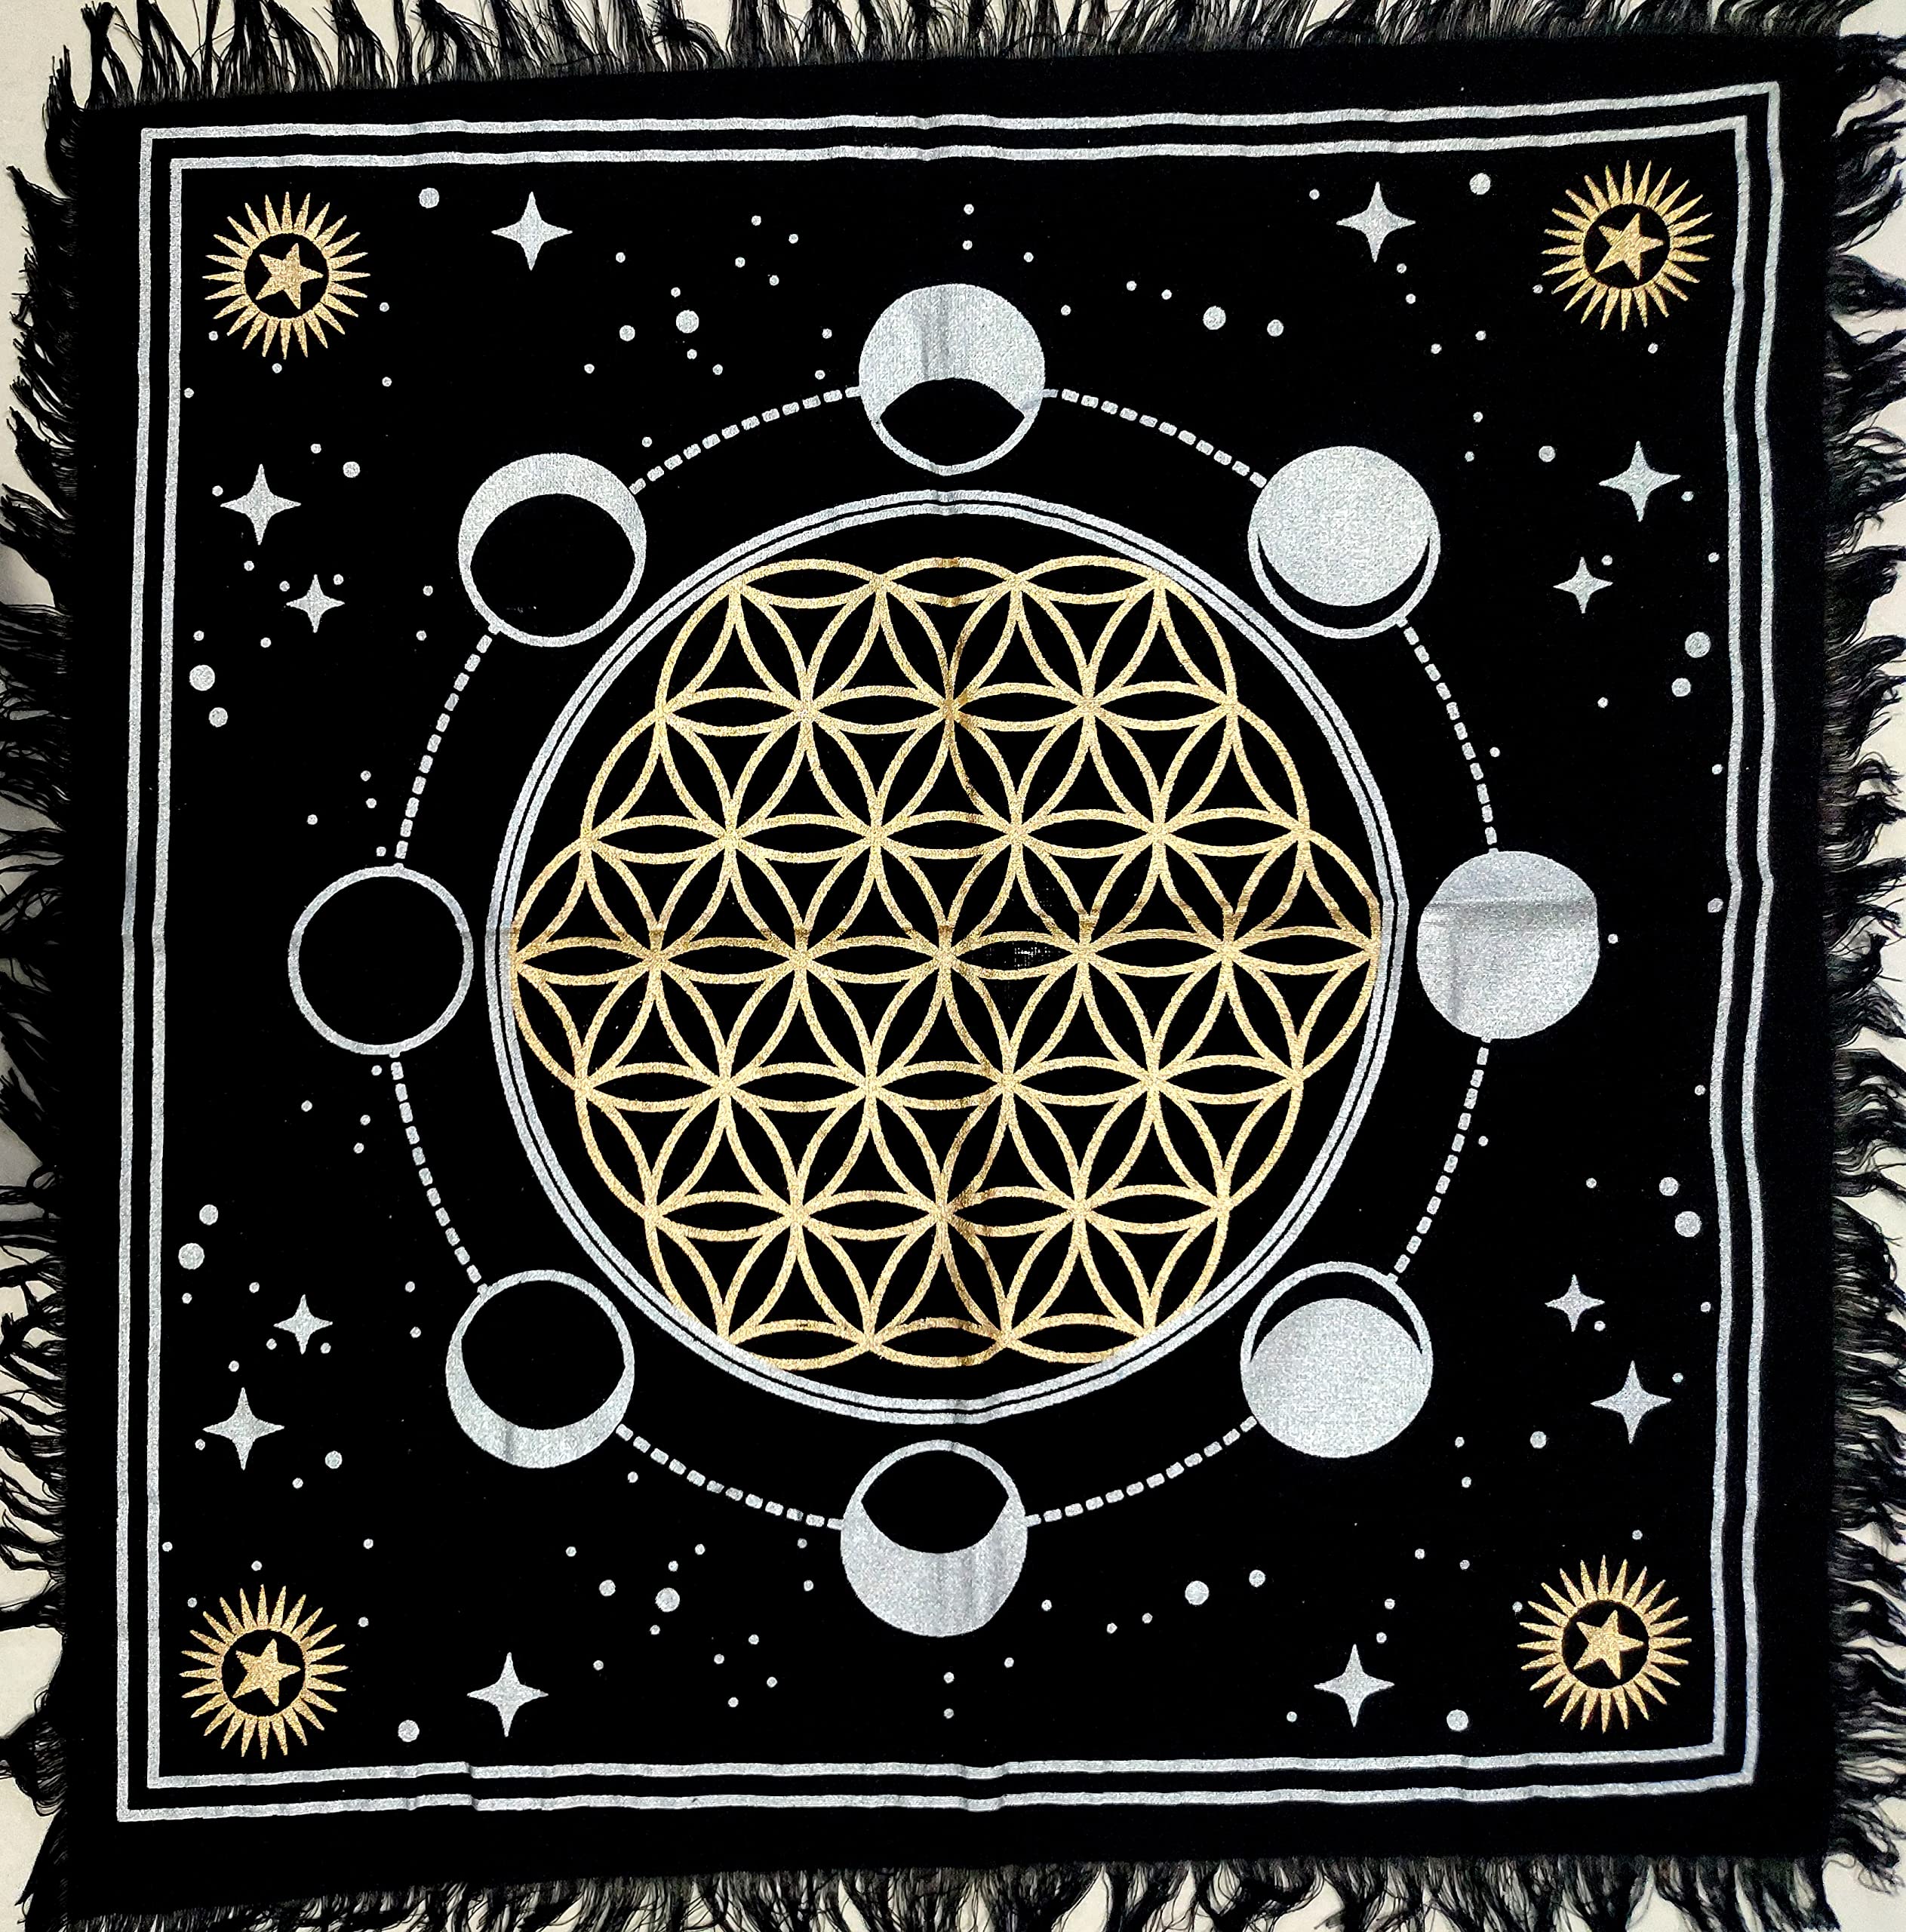 Altar Cloth Phases of Moon Sun, Star Witchcraft Alter Spread Top Cloth Wicca Square Spiritual Tarot Cards Divination Tablecloth Astrology Sacred cloth Room Home Wall Decor 18 by 18 (Moon Phases)